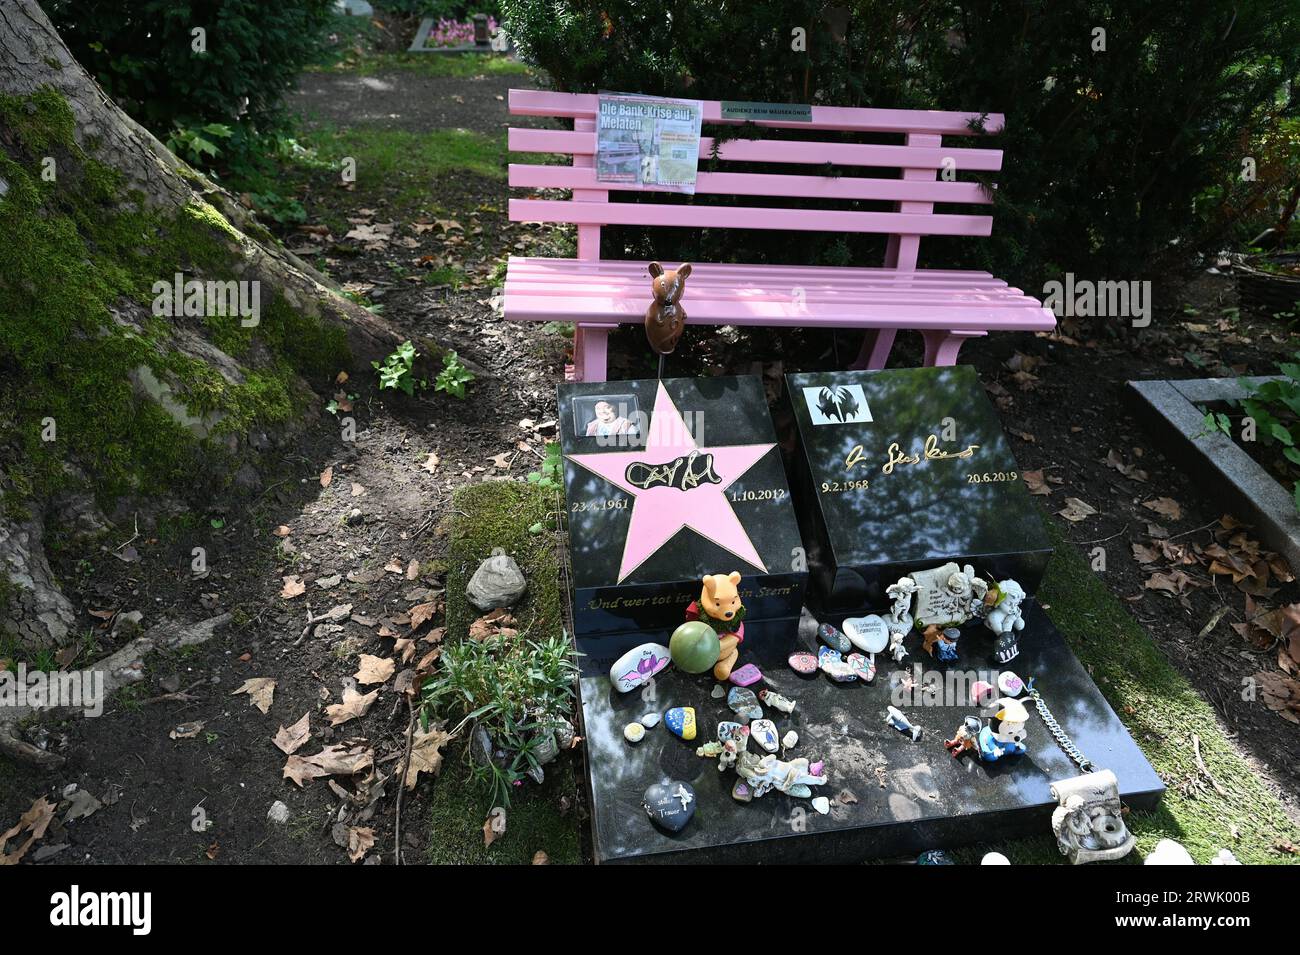 Cologne, Germany. 10th Sep, 2023. The grave of actor, comedian and entertainer Dirk Bach with eye-catching pink bench. Grave at the Cologne celebrity cemetery Melaten Credit: Horst Galuschka/dpa/Horst Galuschka dpa/Alamy Live News Stock Photo